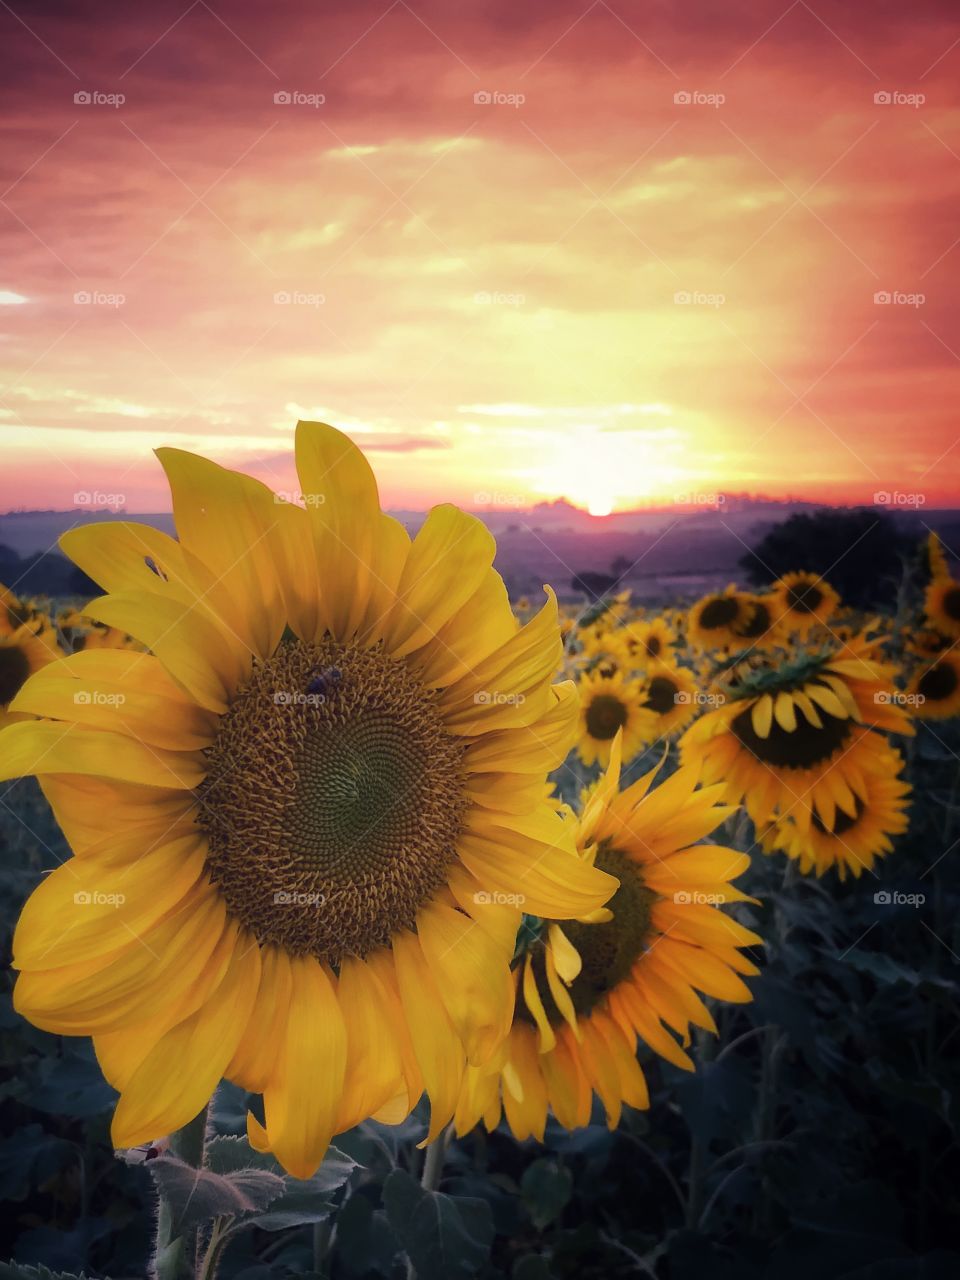 A sunflower field in the Sunset. Richest color scene it is quite difficult to find. The colors, the flowers, the sky, the clouds... everything made this a fairytale scene...